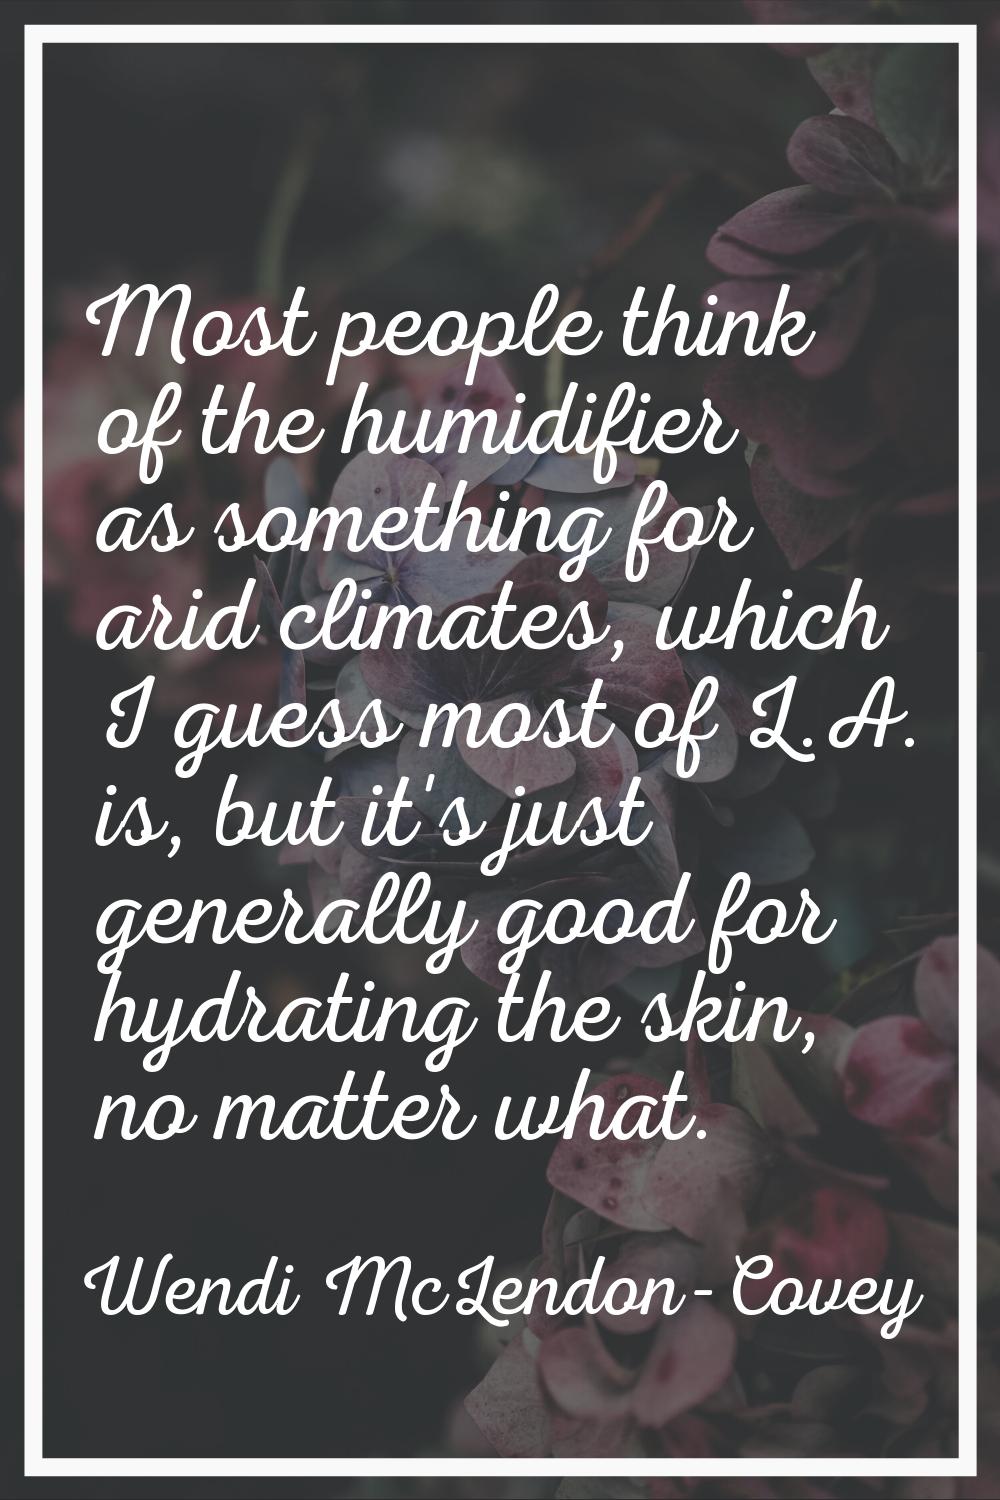 Most people think of the humidifier as something for arid climates, which I guess most of L.A. is, 